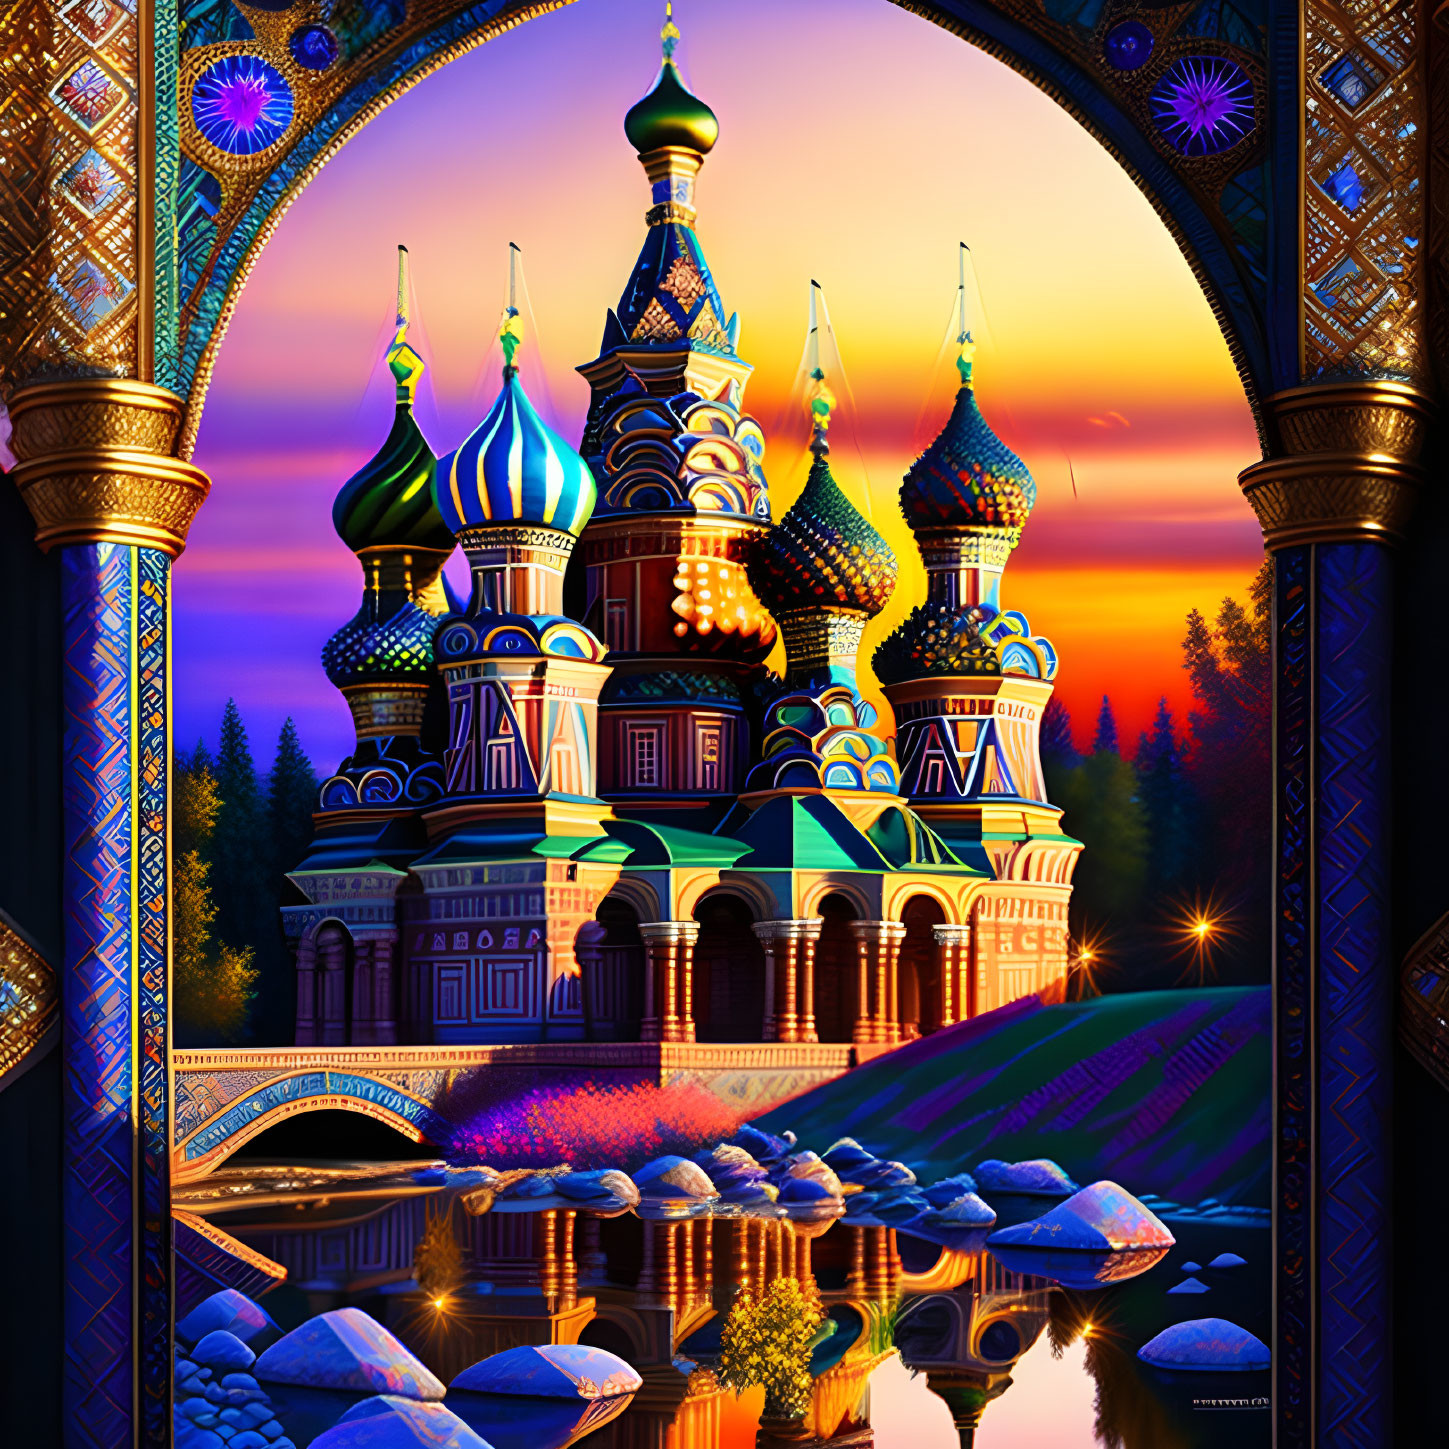 Colorful Saint Basil's Cathedral at sunset with archway, river, and bridge.